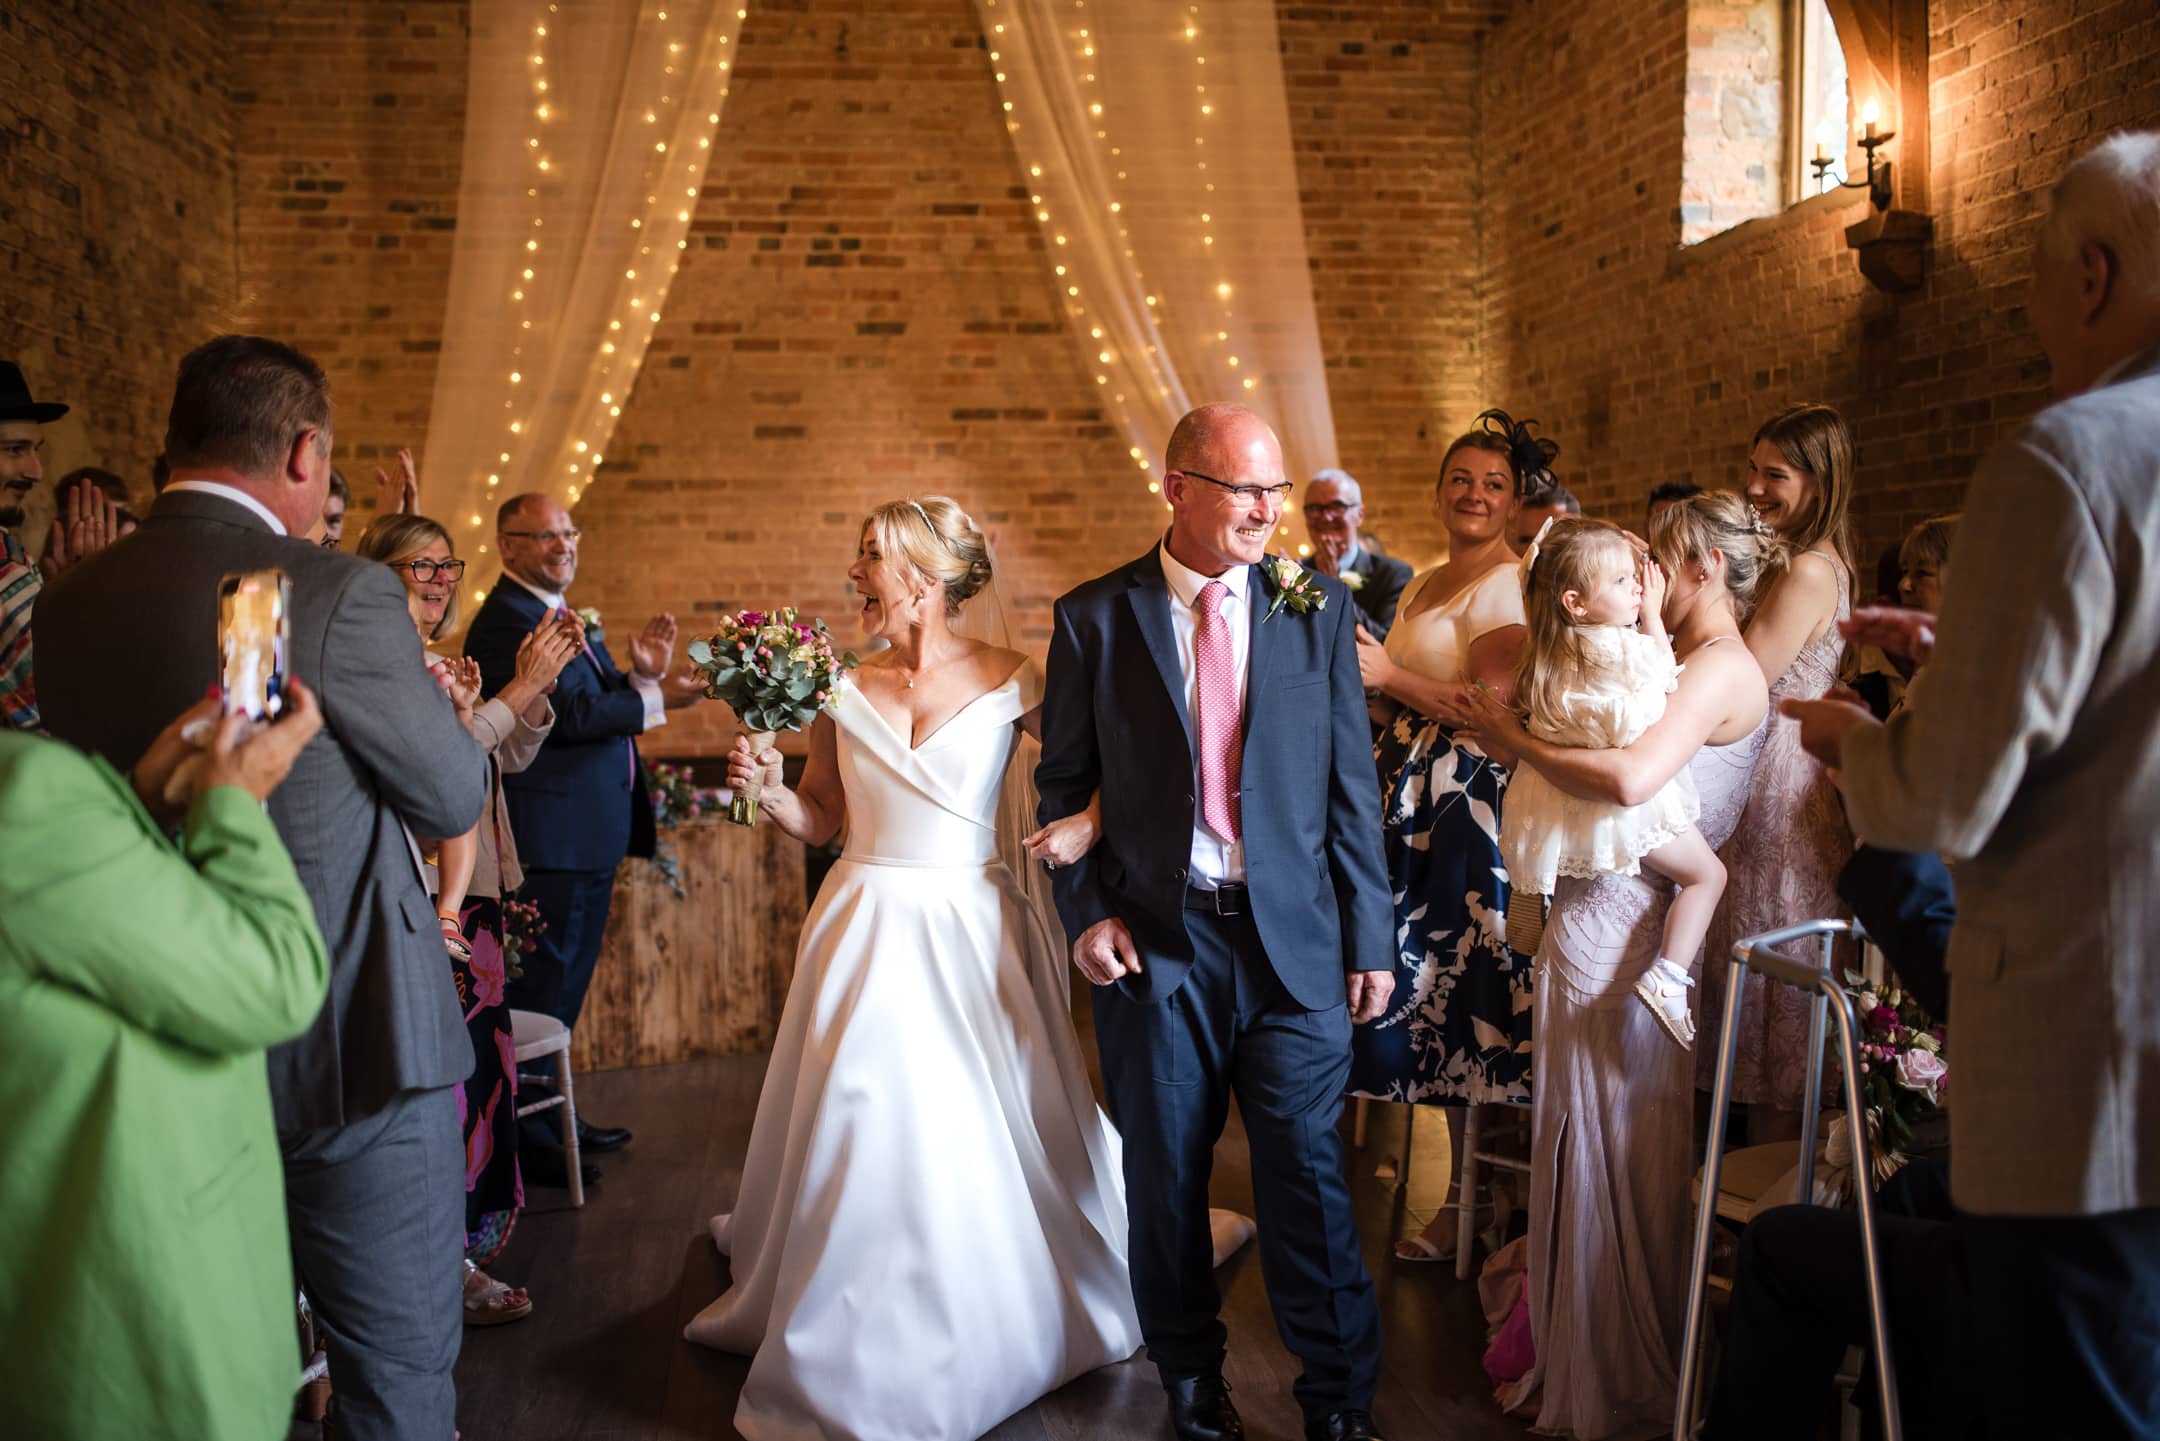 Just married at Dovecote Barn